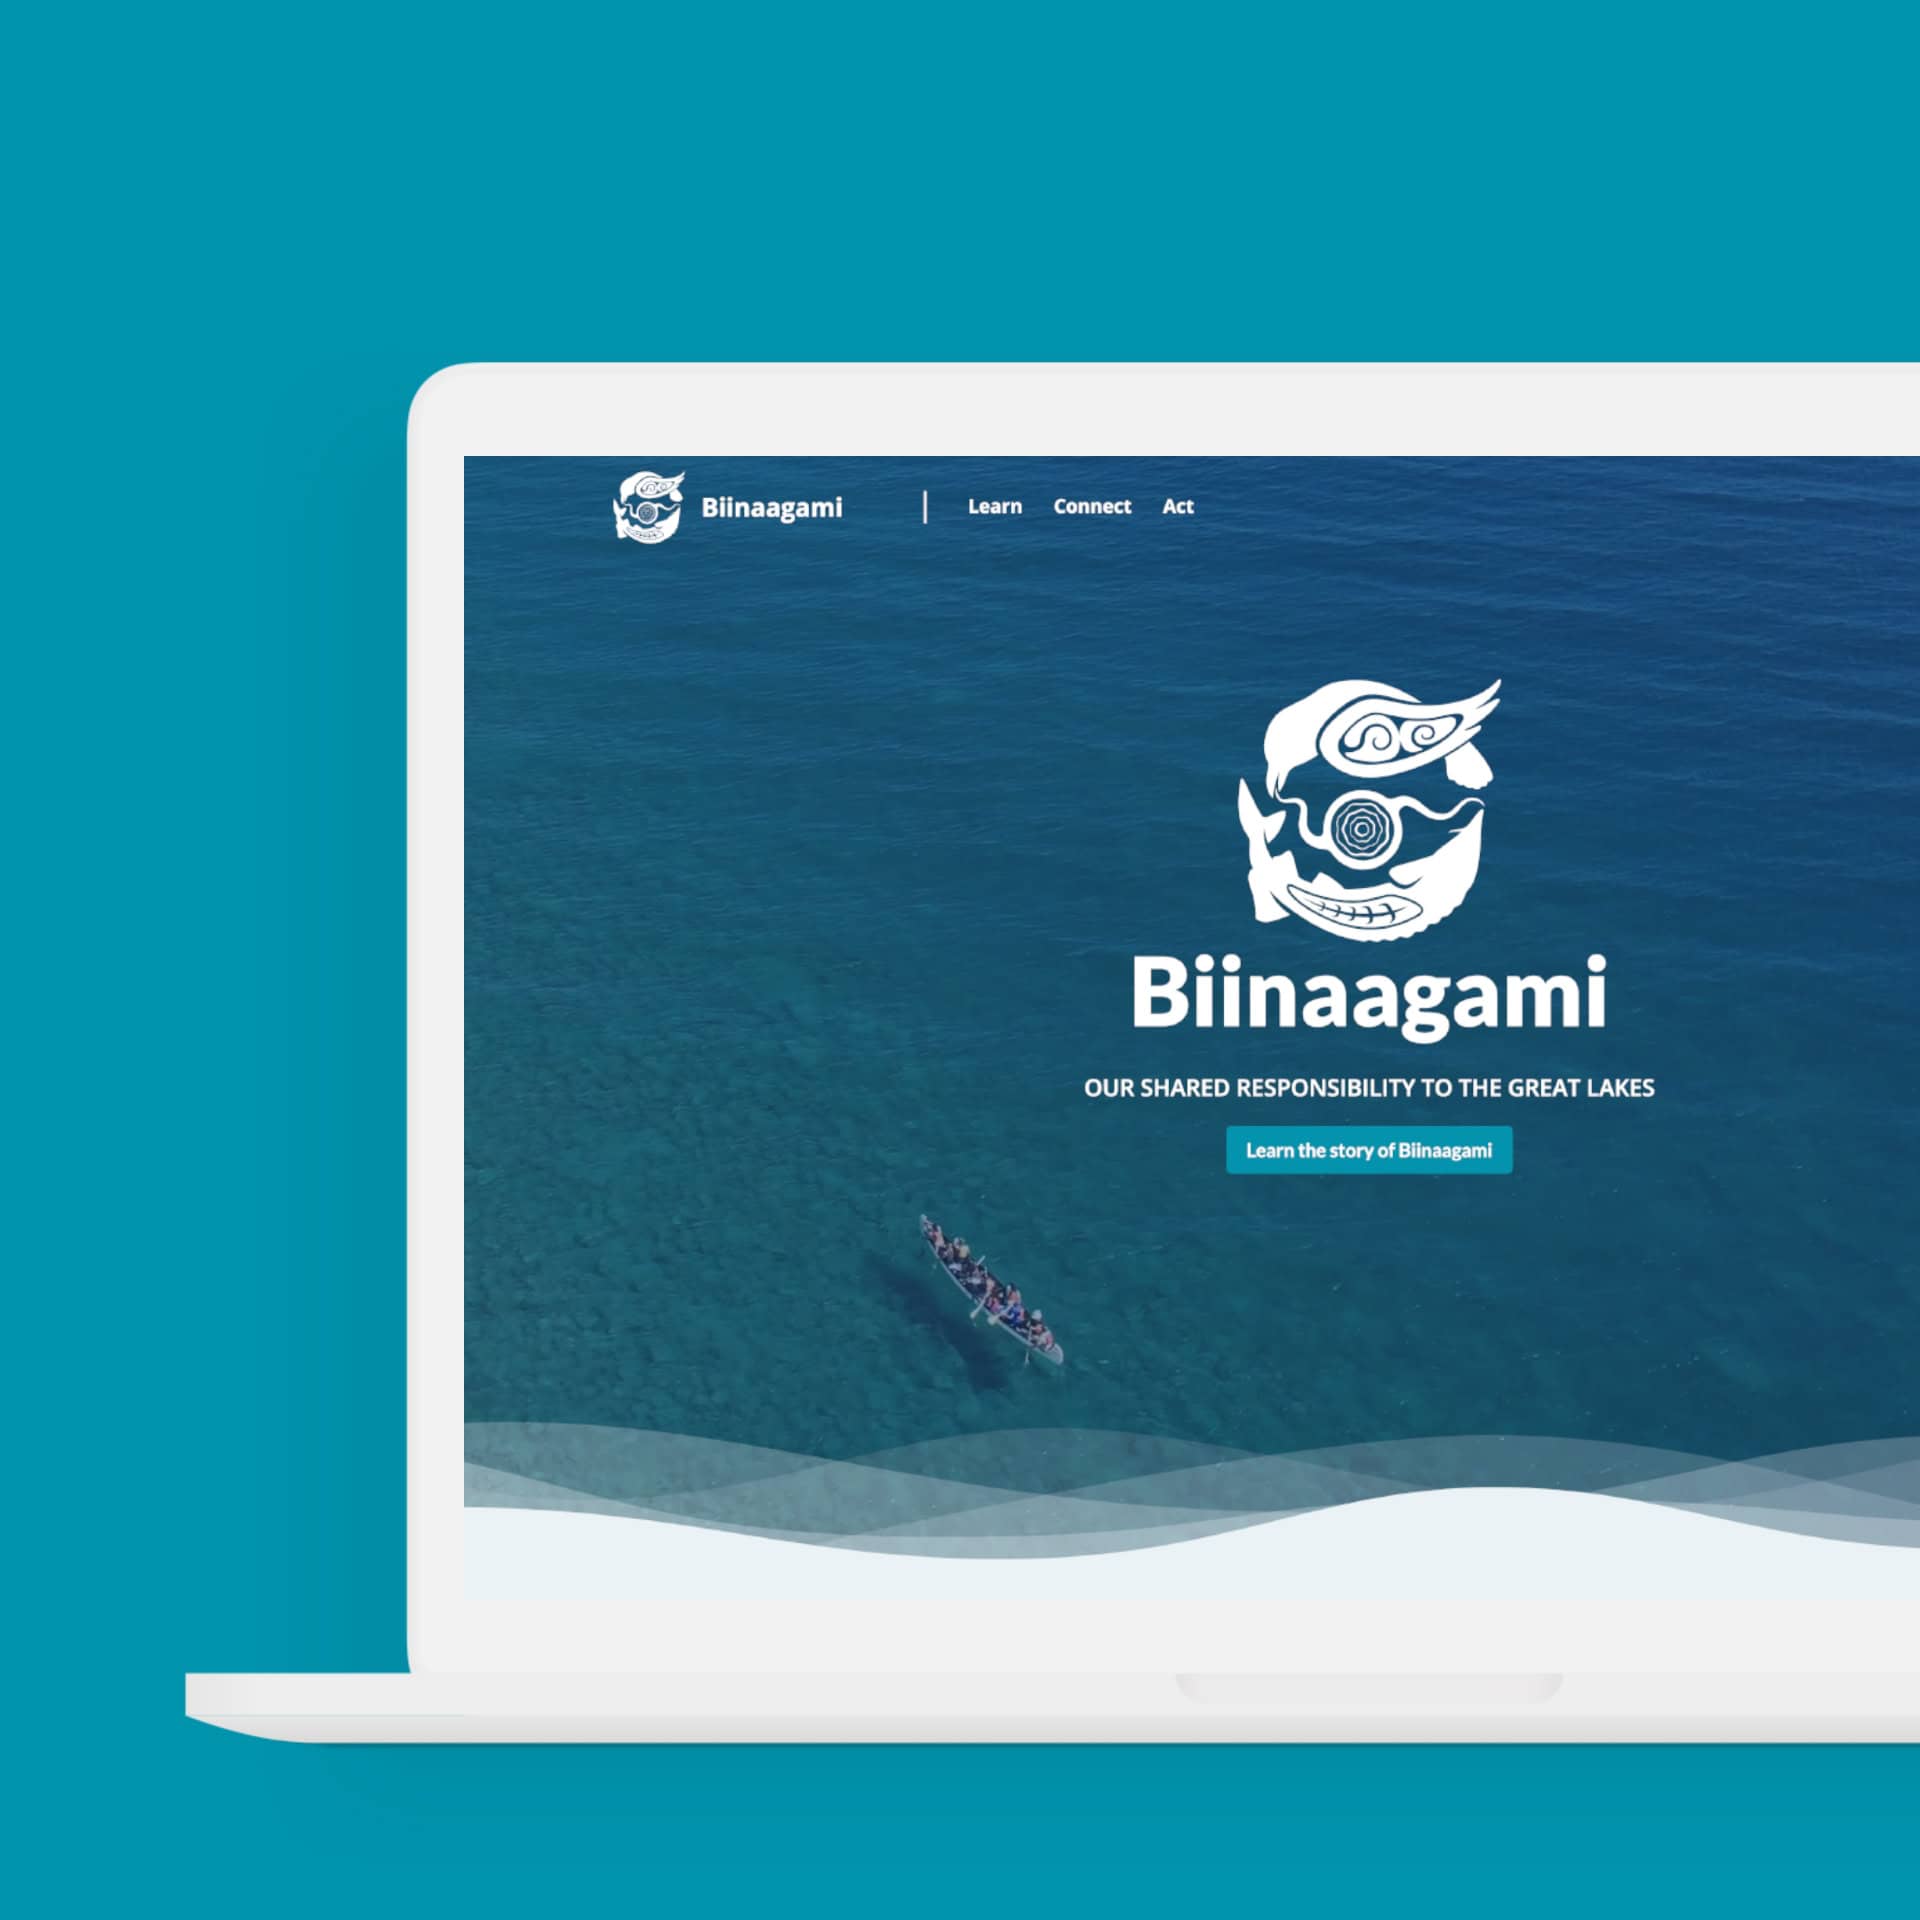 A mac mockup of the Biinaagami website is shown, with the logo prominently displayed against the animated water video on the homepage.